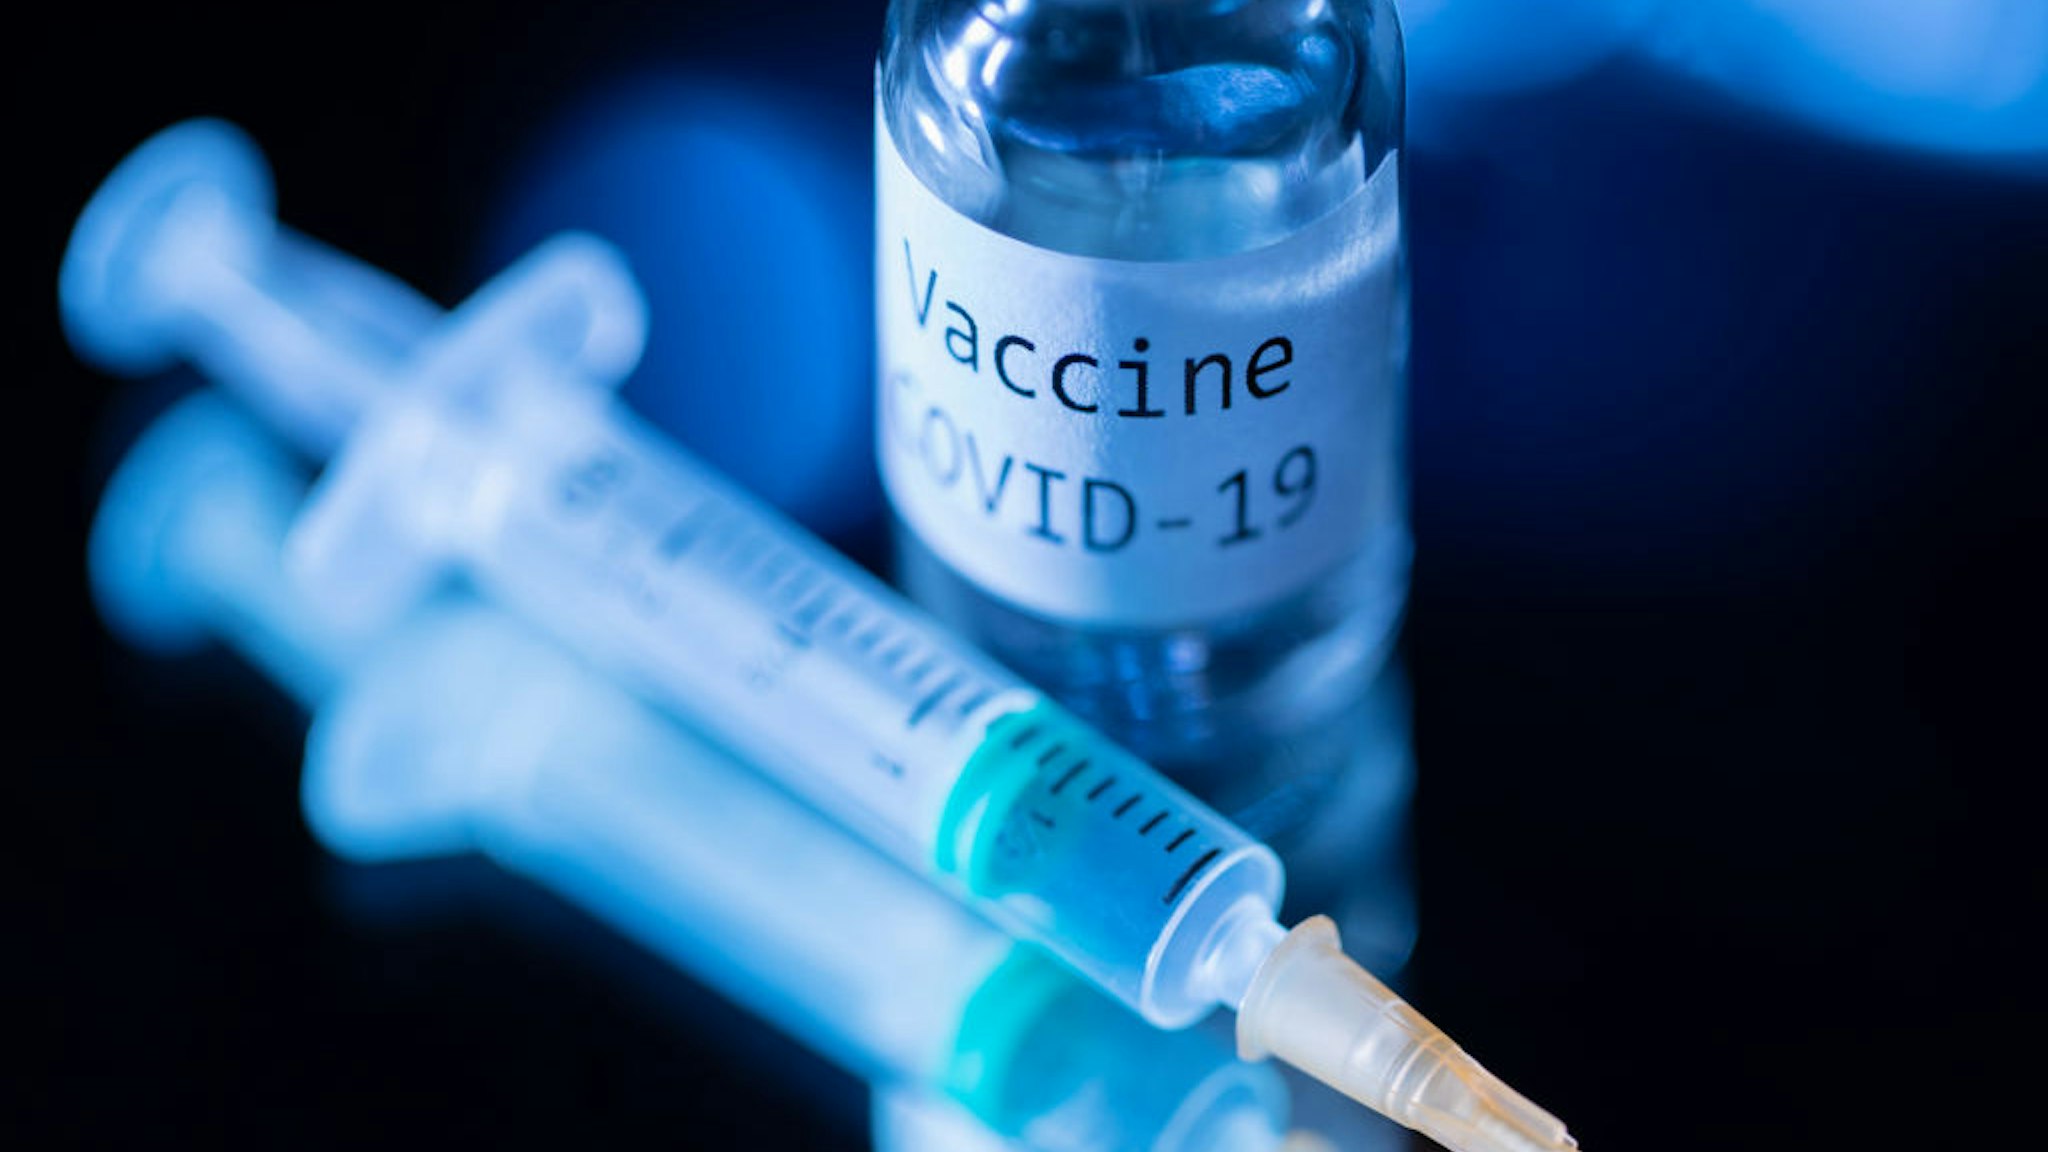 TOPSHOT - This picture taken on November 17, 2020 shows a syringe and a bottle reading "Vaccine Covid-19". - According to the World Health Organization, some 42 "candidate vaccines" against the novel coronavirus Covid-19 are undergoing clinical trials on November 17, 2020.